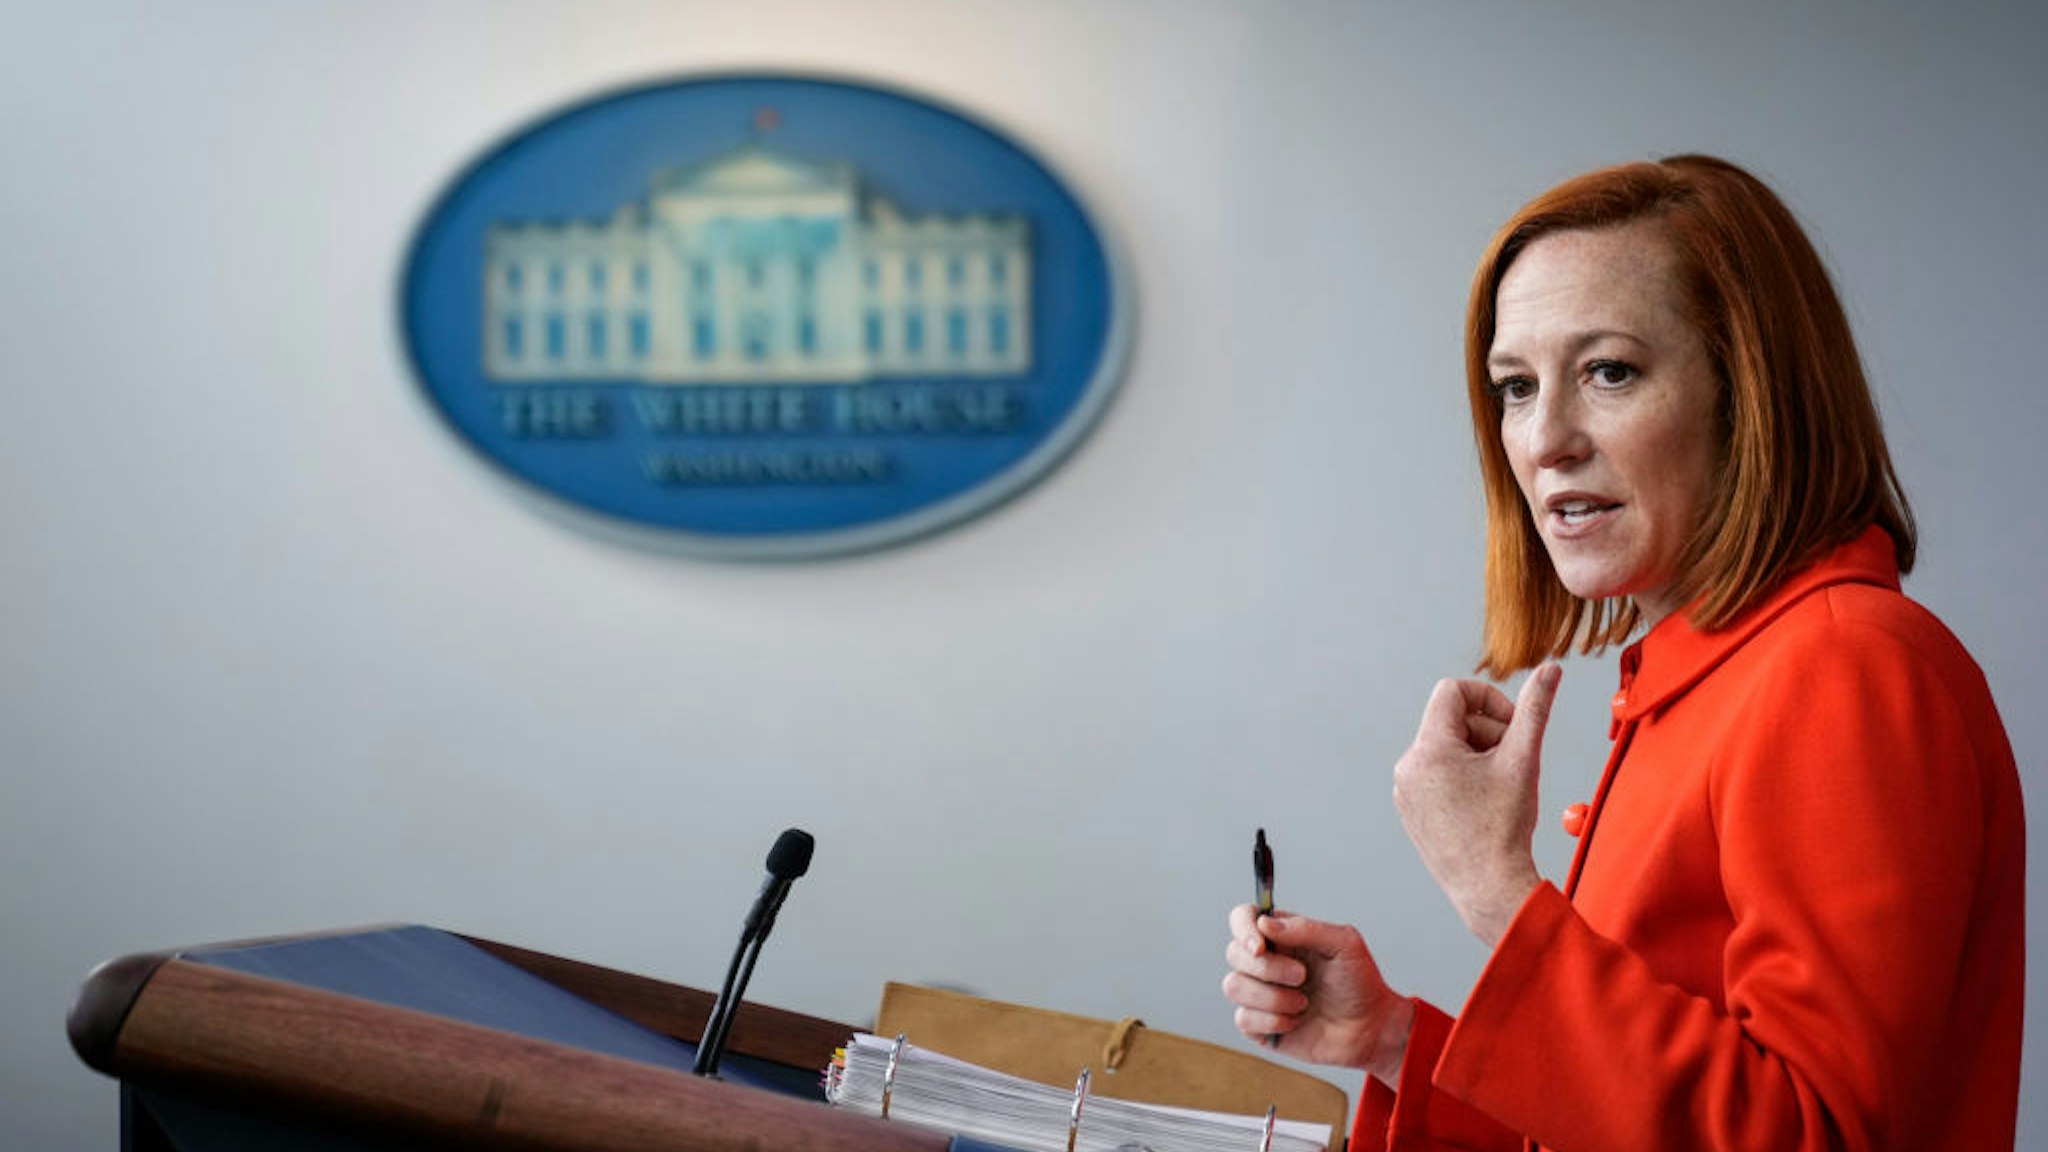 WASHINGTON, DC - MAY 12: White House Press Secretary Jen Psaki speaks during the daily press briefing at the White House on May 12, 2021 in Washington, DC. The majority of the briefing focused on the ransomware attack on the Colonial Pipeline. More than three-quarters of gas stations in some southern U.S. cities have run out of gasoline as the pipeline shutdown stretches into a fifth day. (Photo by Drew Angerer/Getty Images)